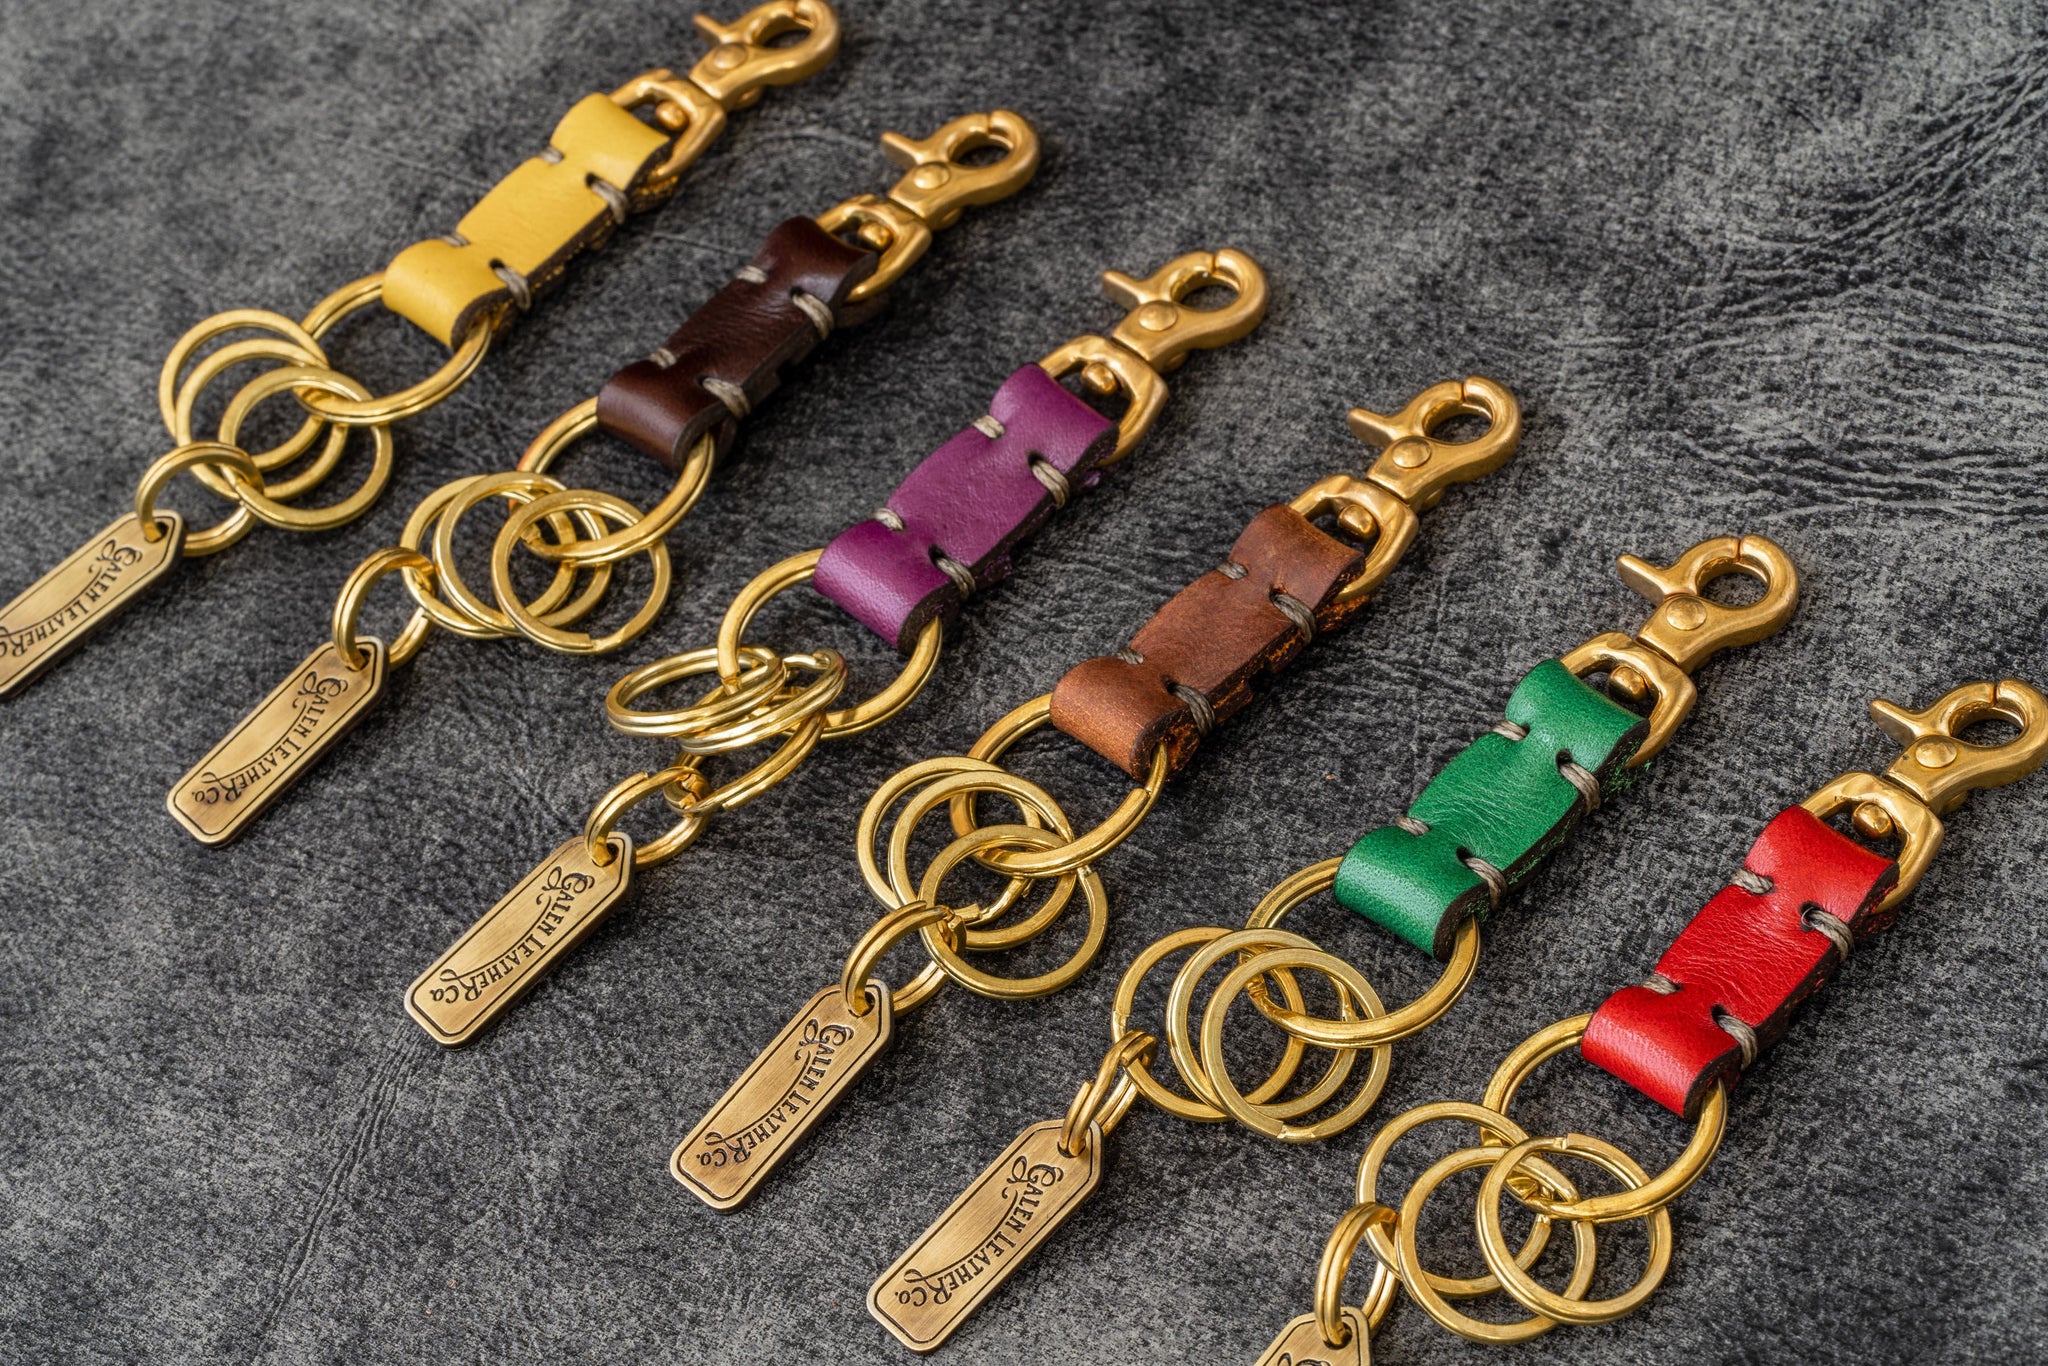 Solid Brass Key Chain Holder Keyrings Bag Wallet Chain Keychains With Snap  Hook